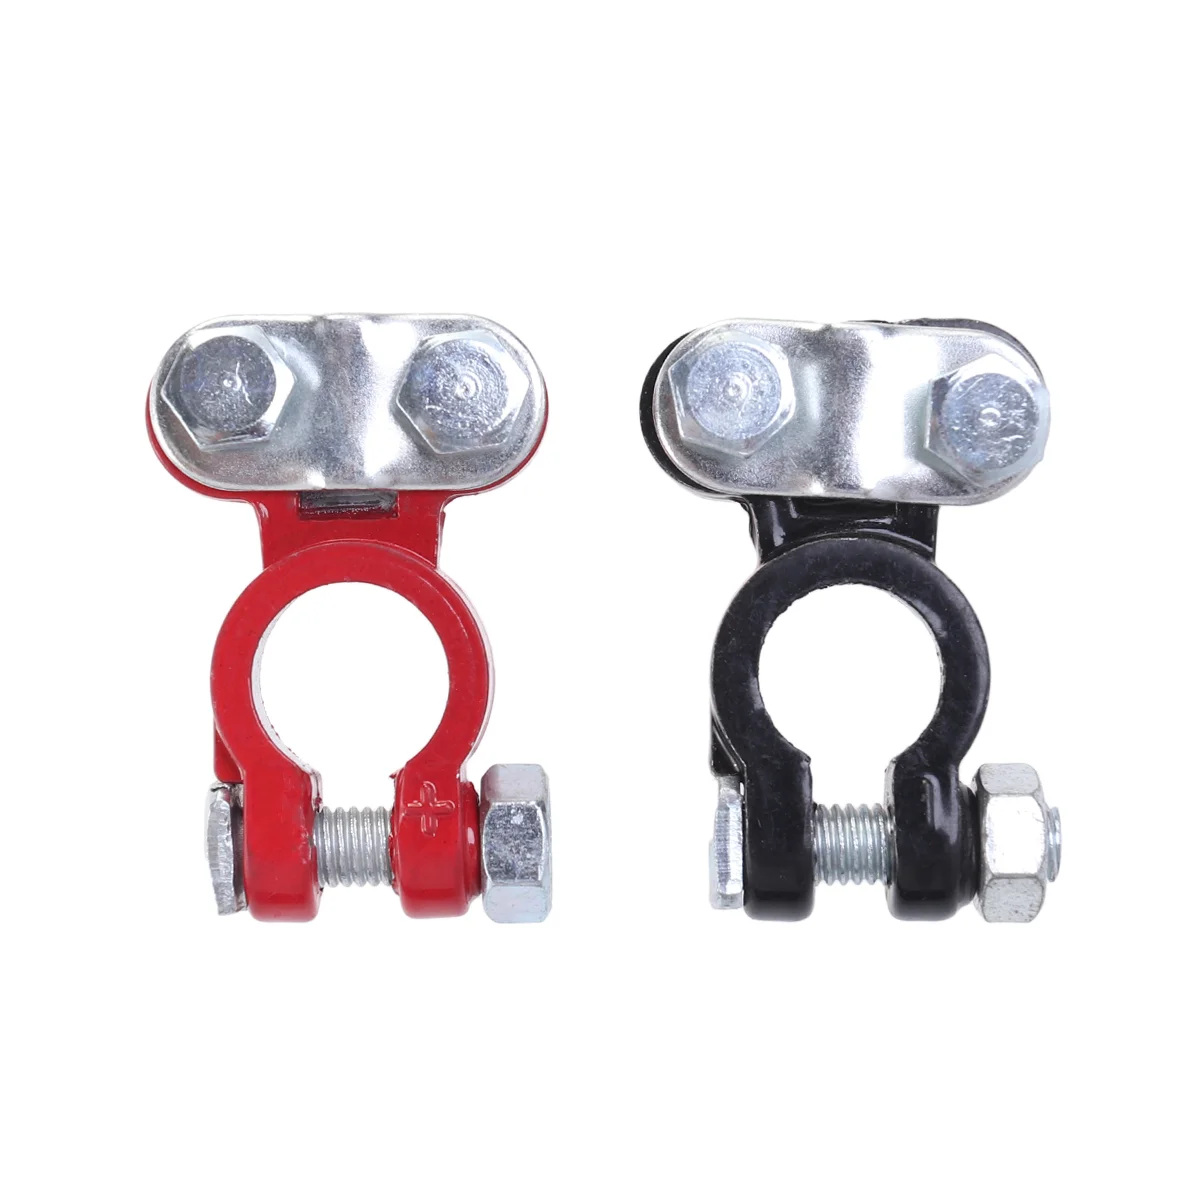 

Of Cable Terminal Professional Anti-Corrosion Positive Negative Terminal Connector Clamp For Car Truck